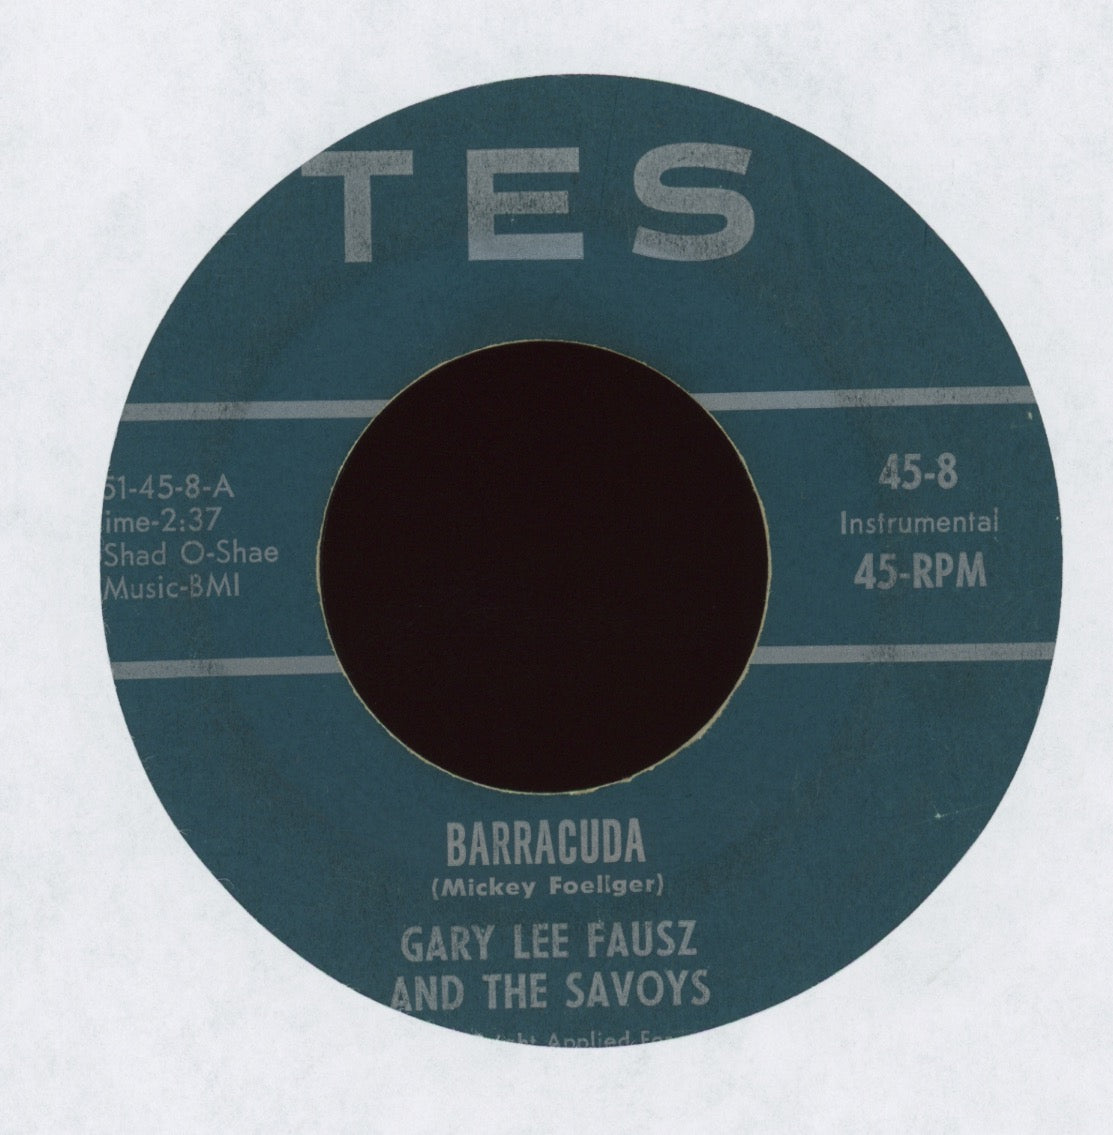 Gary Lee Fausz And The Savoys - Barracuda on TES